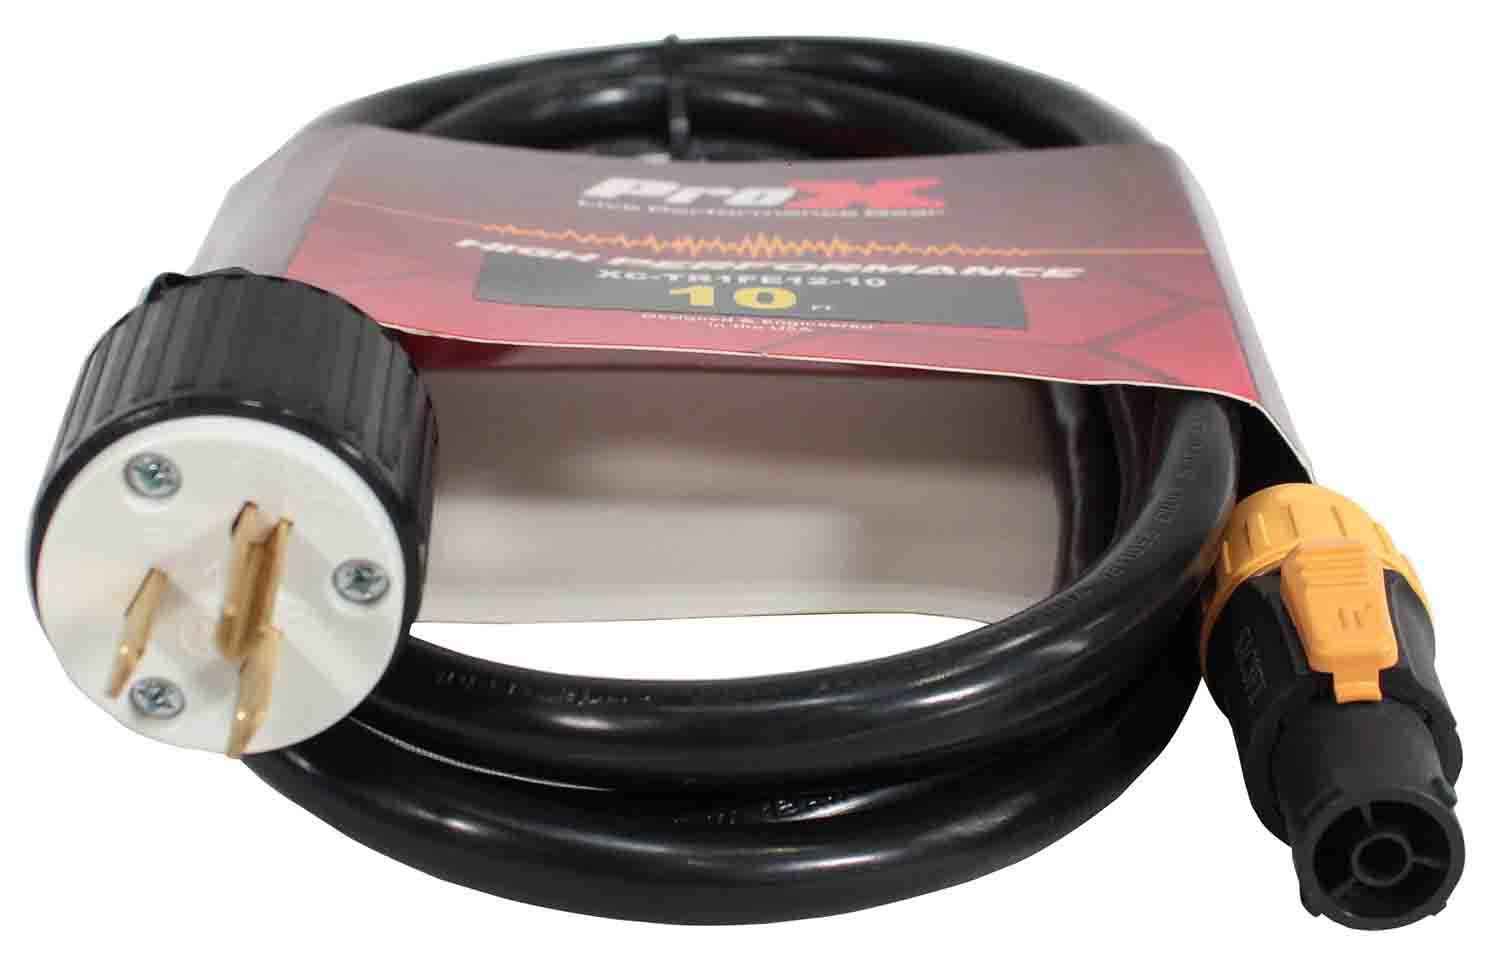 ProX XC-TR1FE12-10, 12AWG 120VAC Male Edison NEMA 5-15P to Male Cable for Powercon Compatbile Devices - 10 Feet - Hollywood DJ